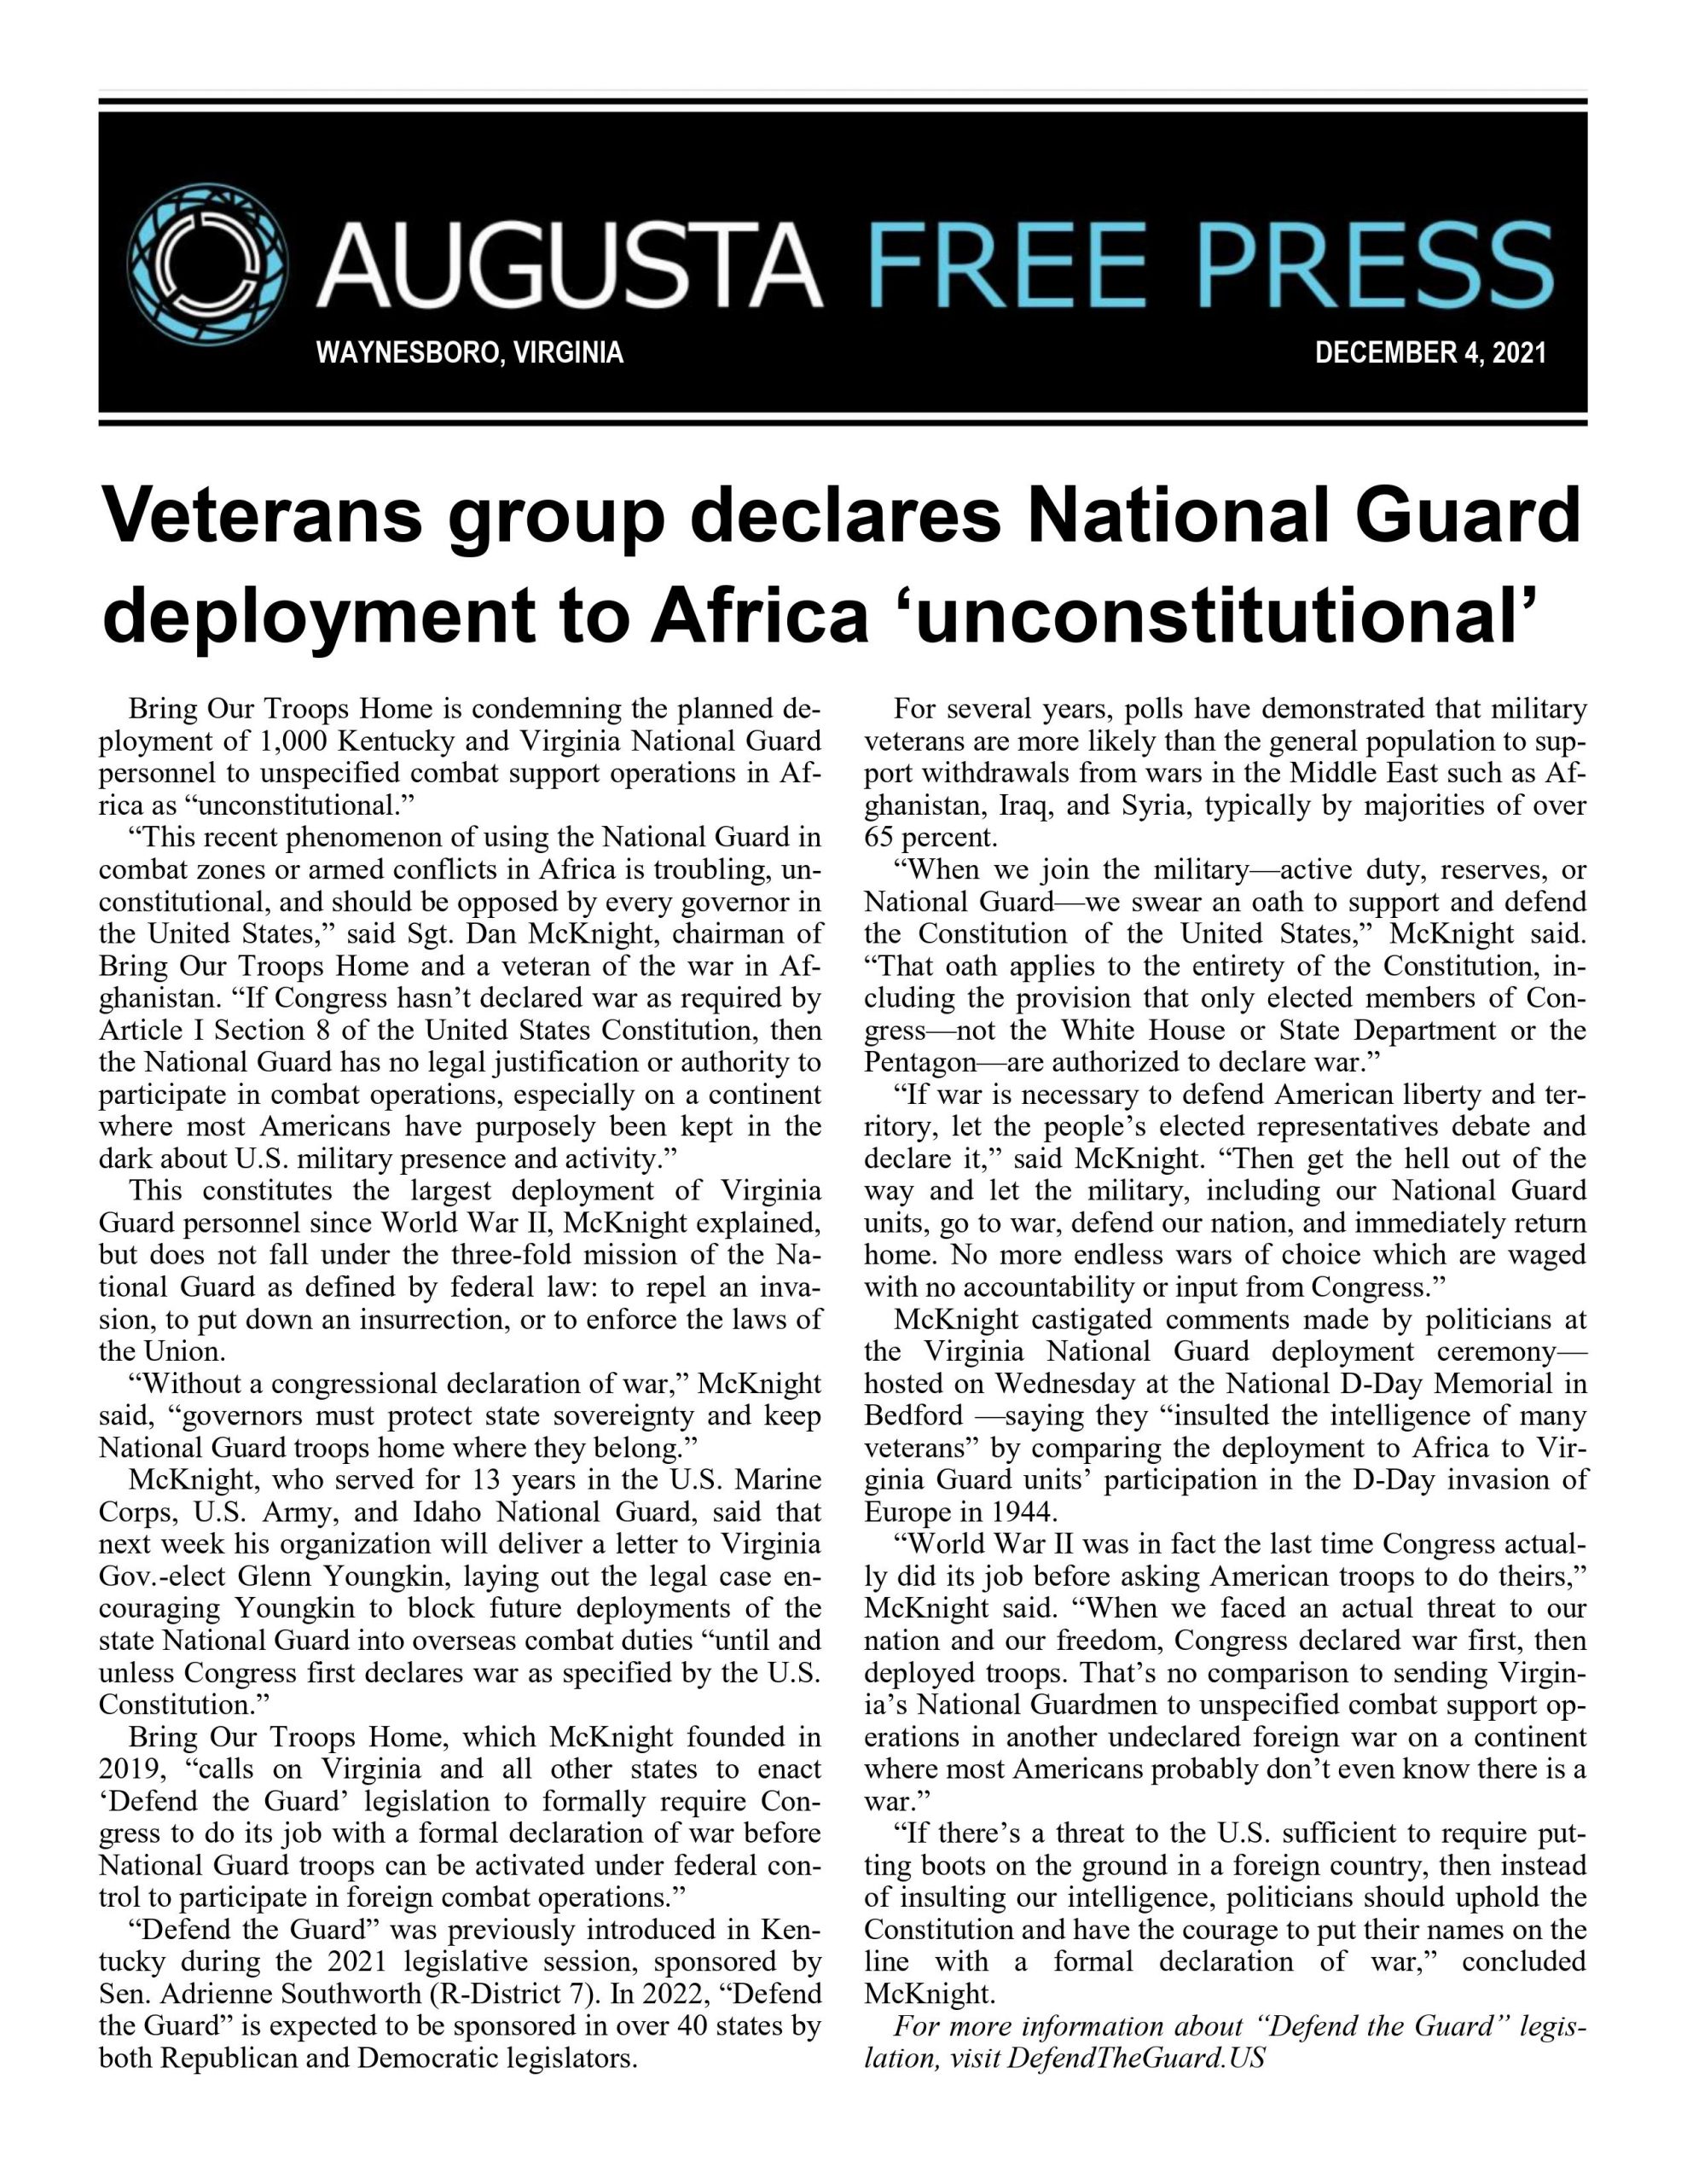 Veterans Group Declares National Guard Deployment to Africa ‘Unconstitutional’